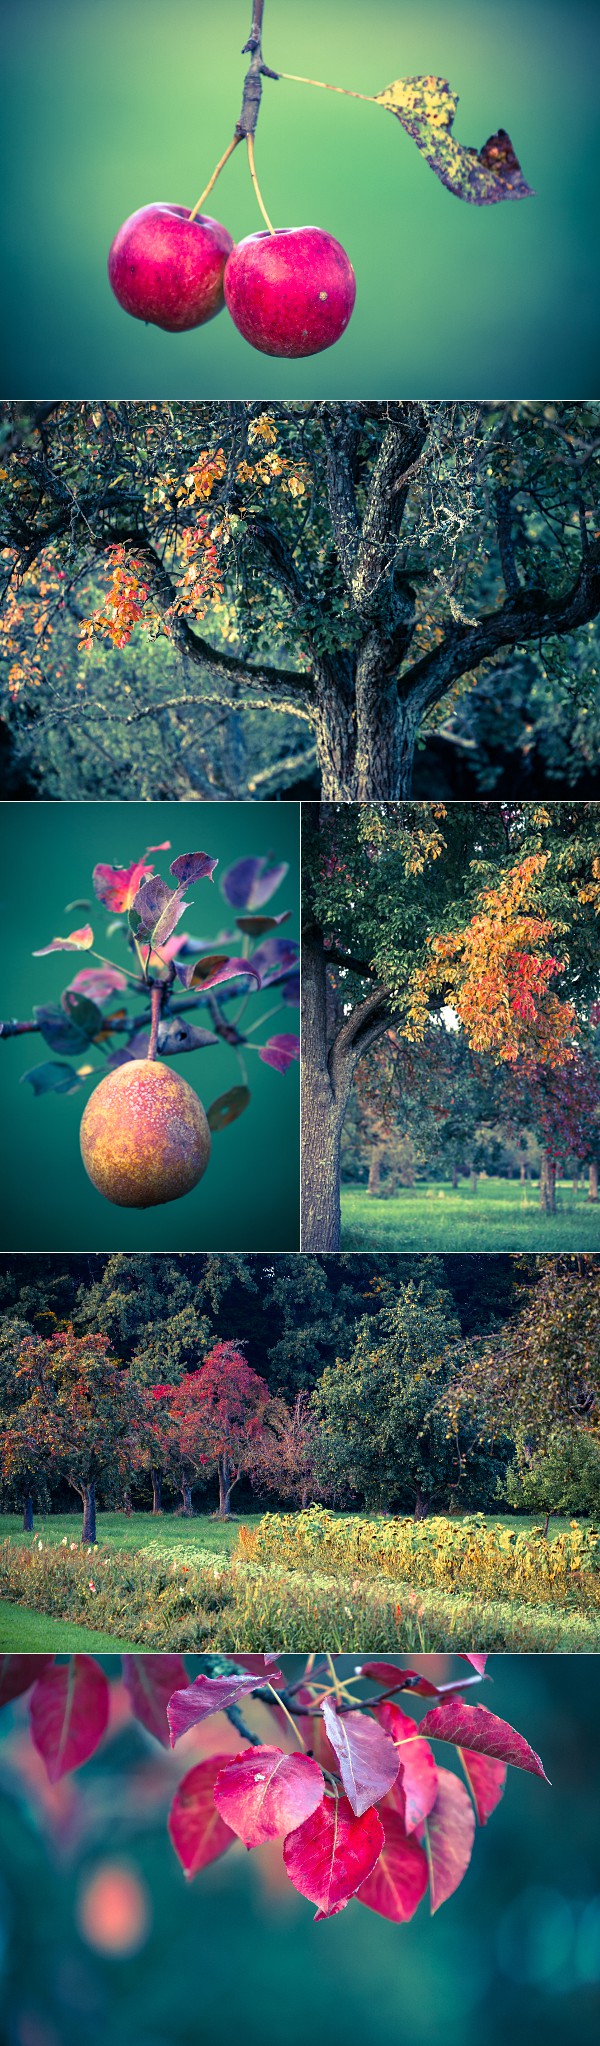 autumn colours collage, digital cross processed, orchard fruit trees, apple and pear